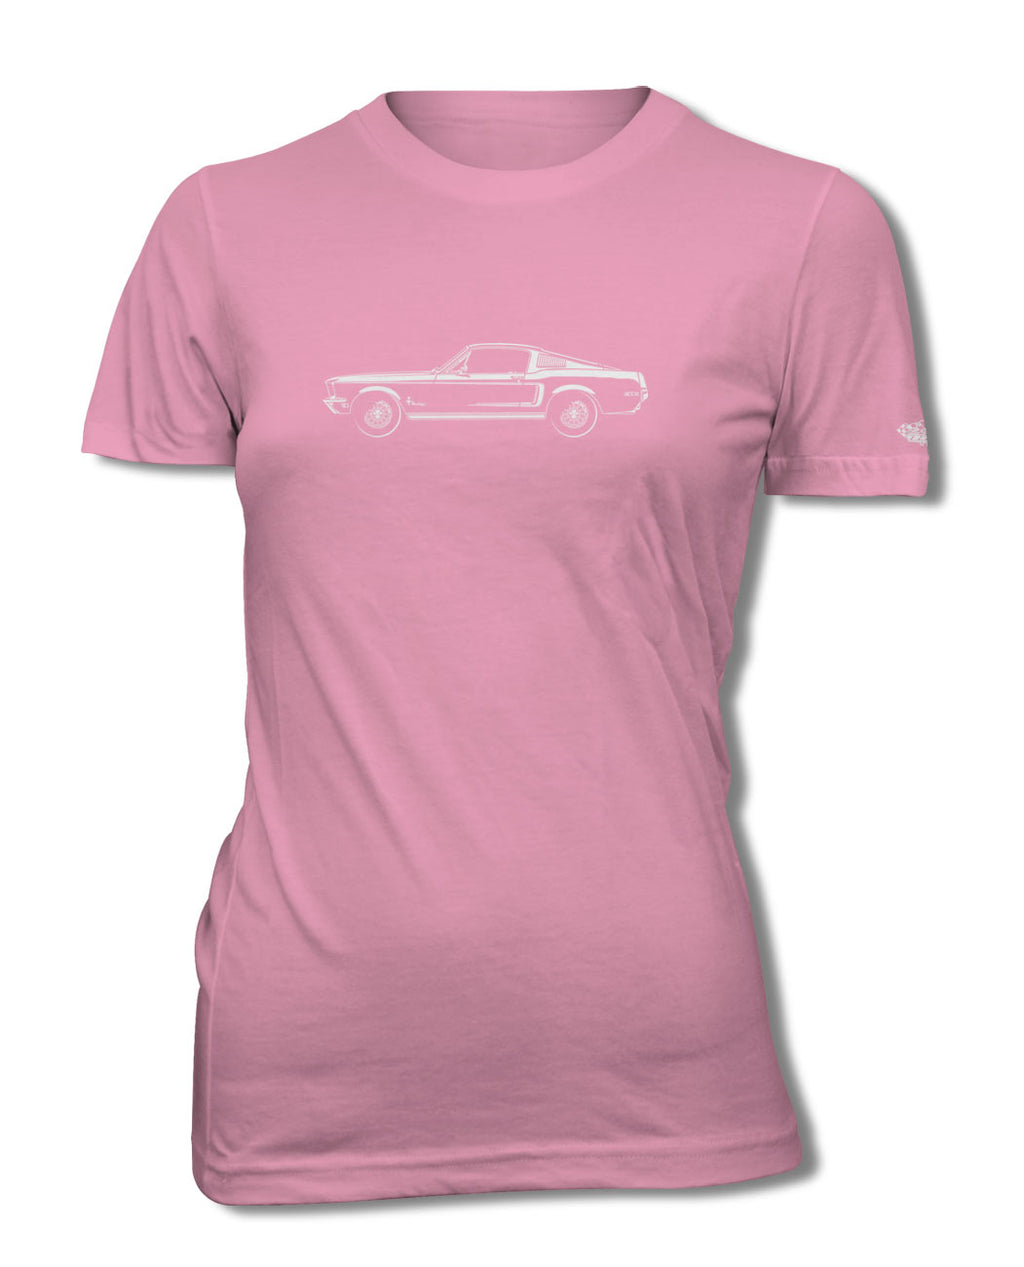 1968 Ford Mustang Base Fastback with Stripes T-Shirt - Women - Side View